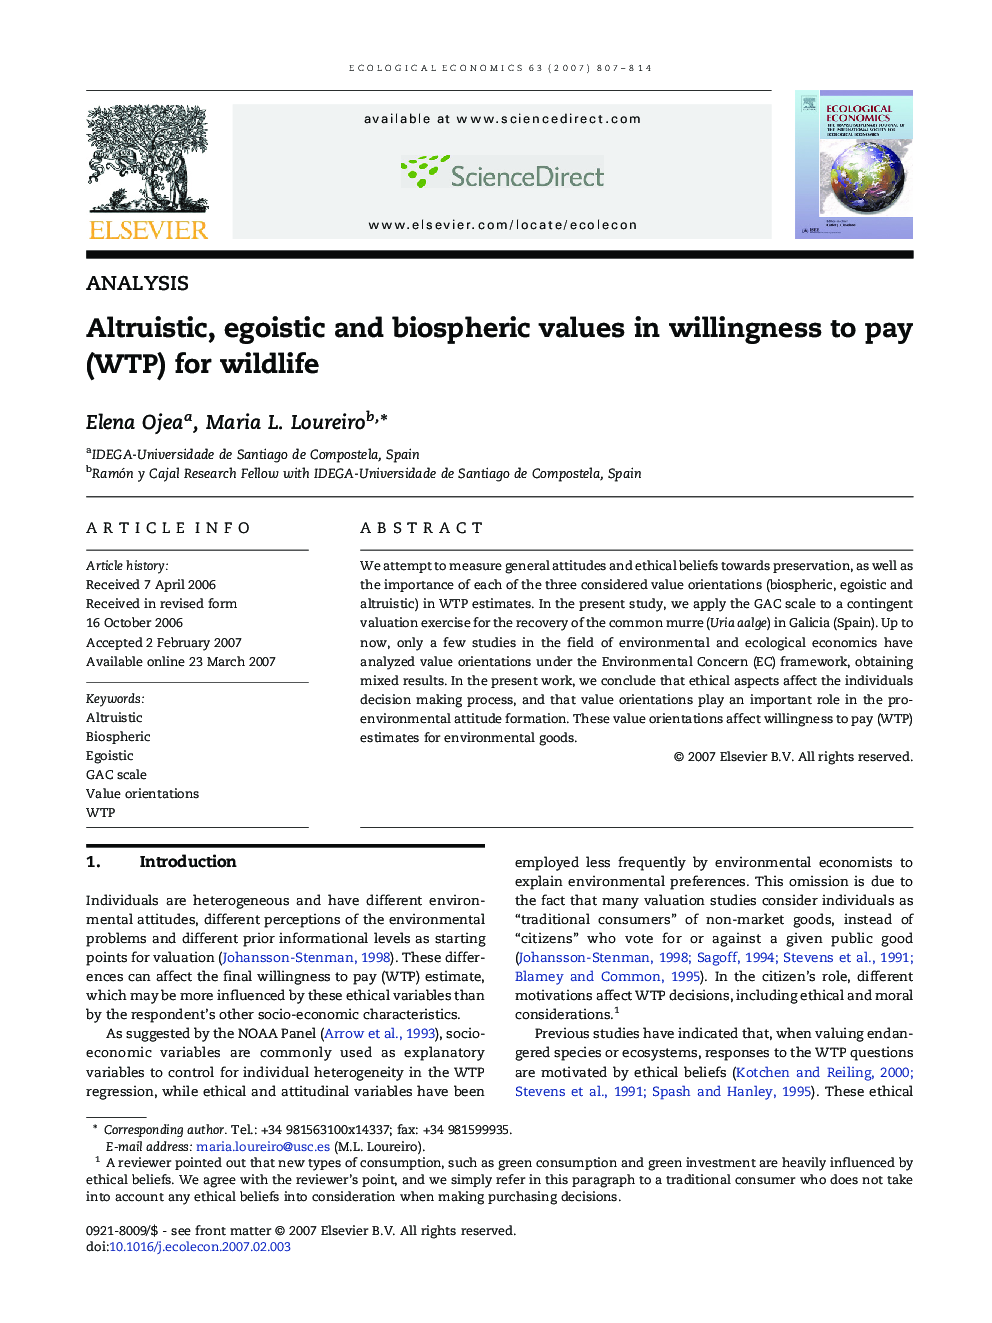 Altruistic, egoistic and biospheric values in willingness to pay (WTP) for wildlife